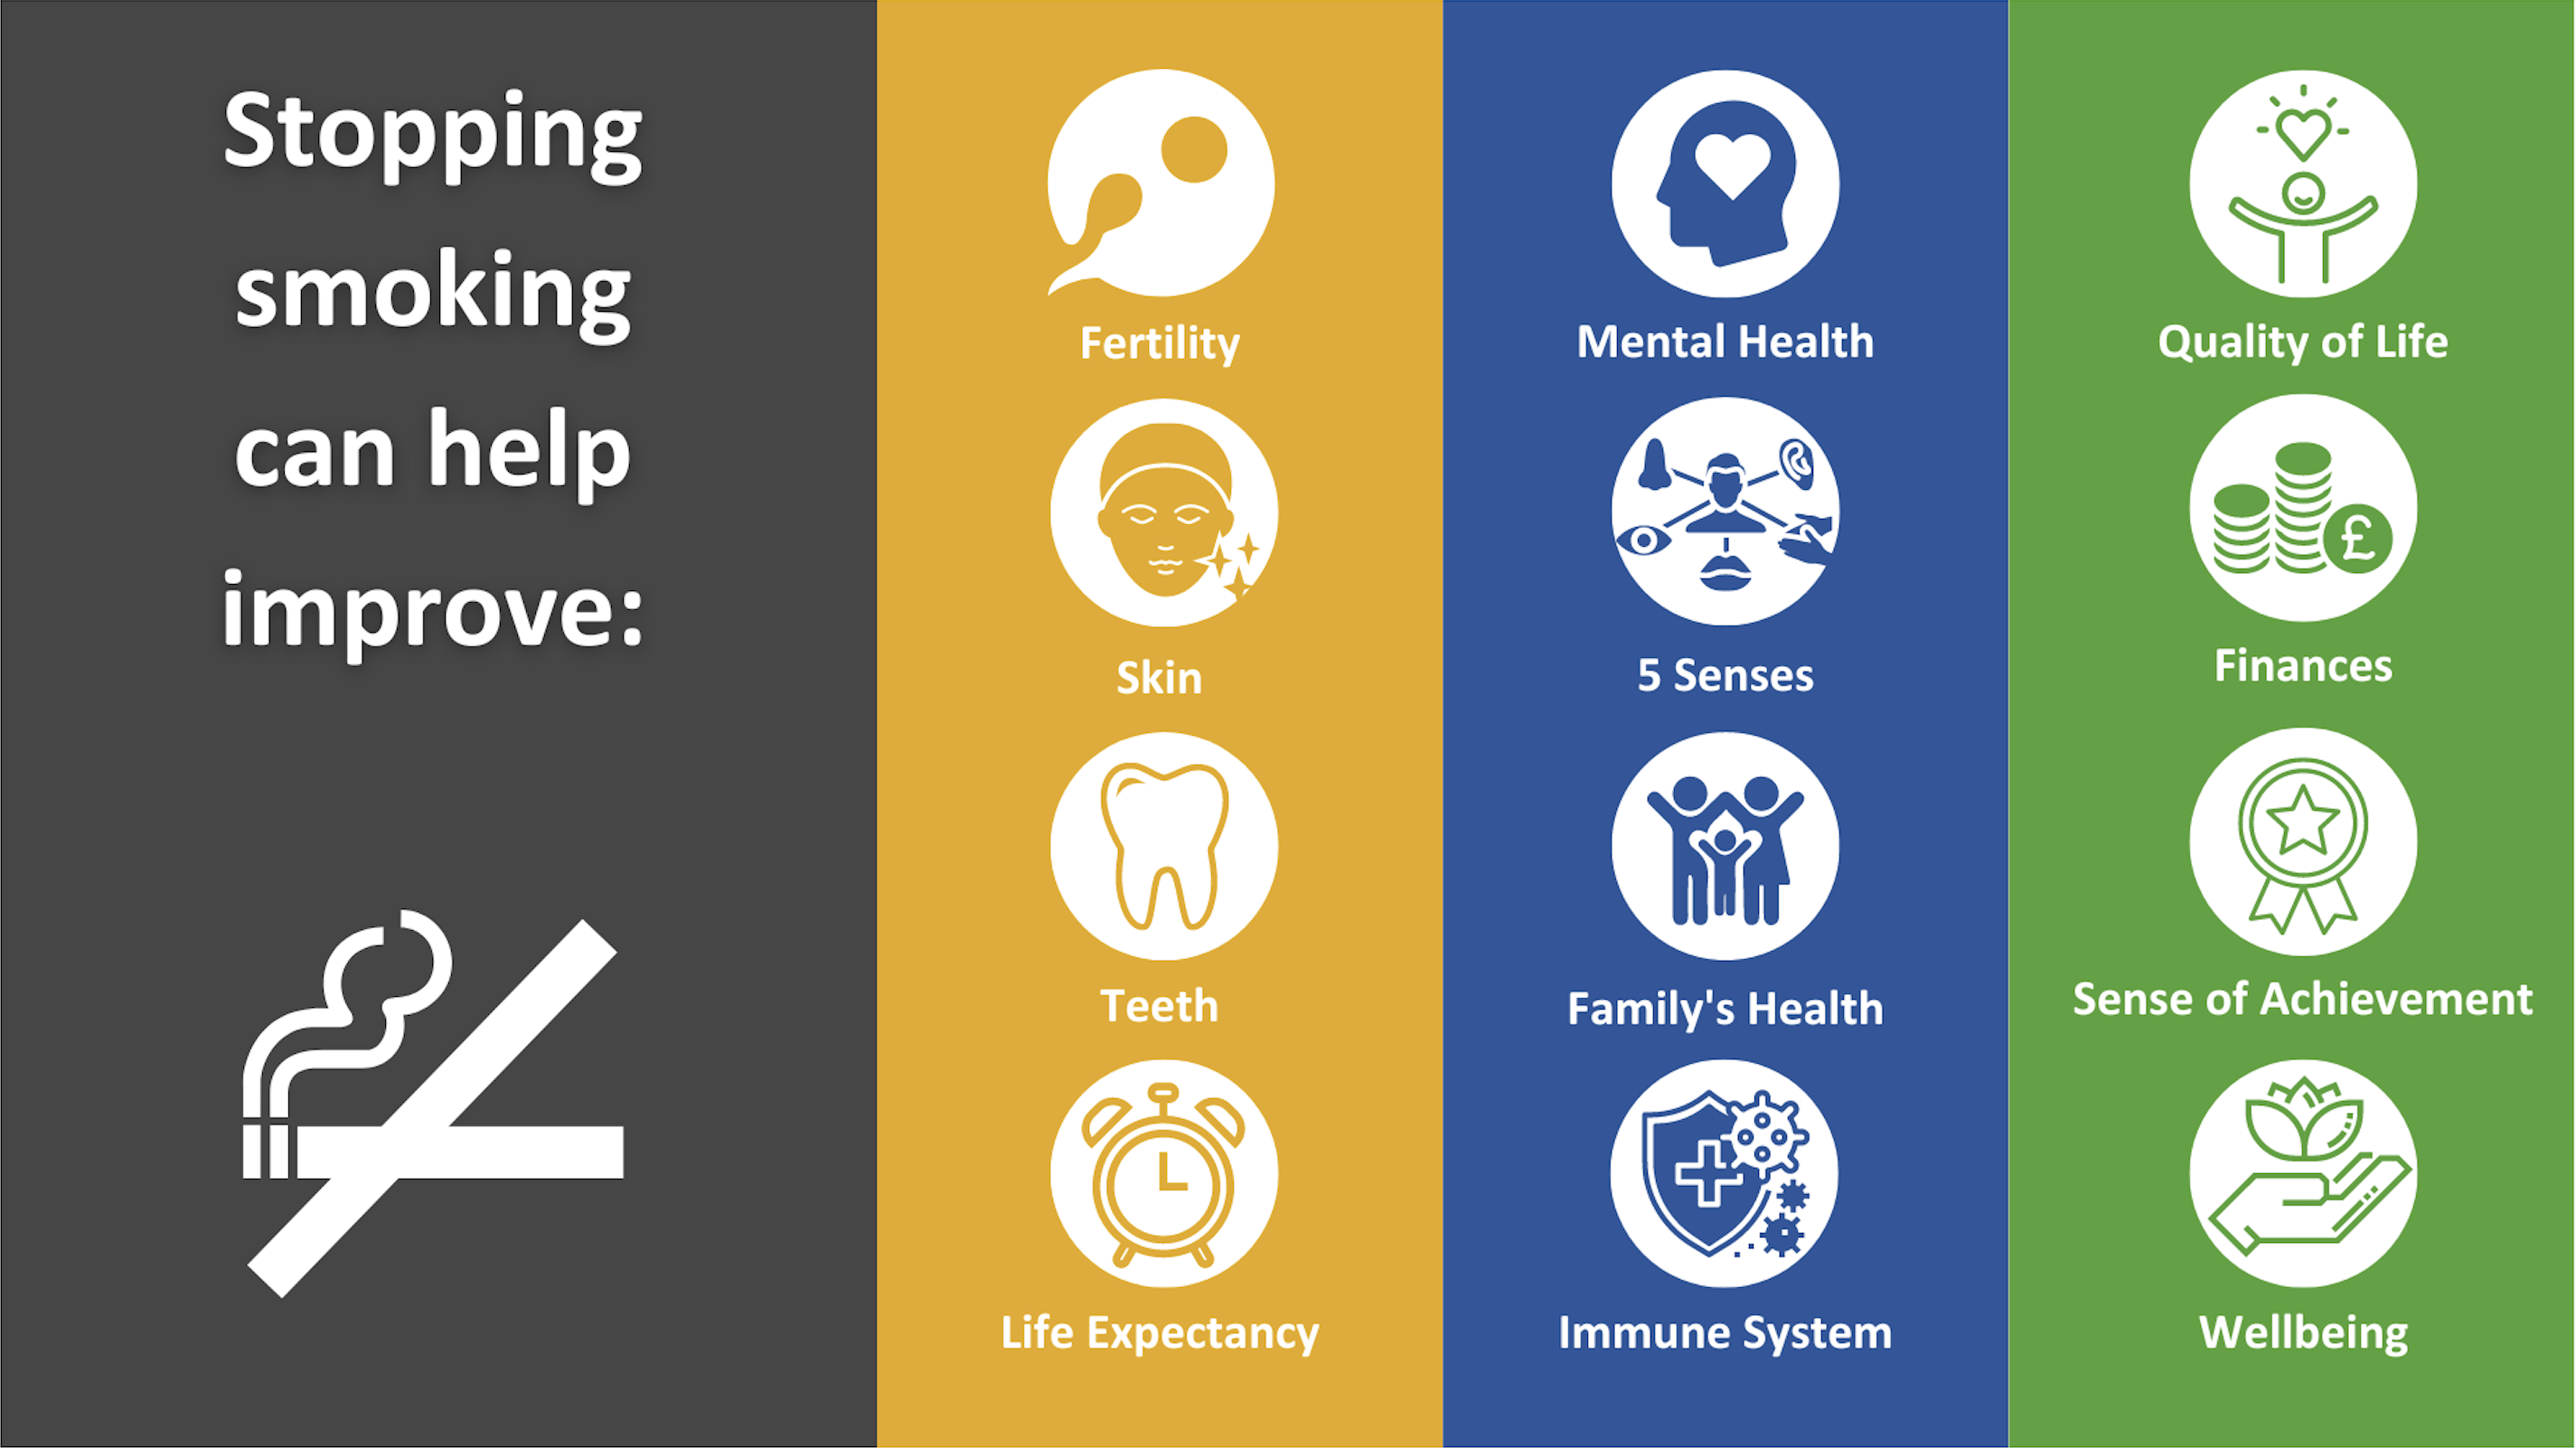 Infographic detailing what quitting smoking can improve for you. This includes your 5 senses, sense of achievement, finances, life expectancy and immune system.